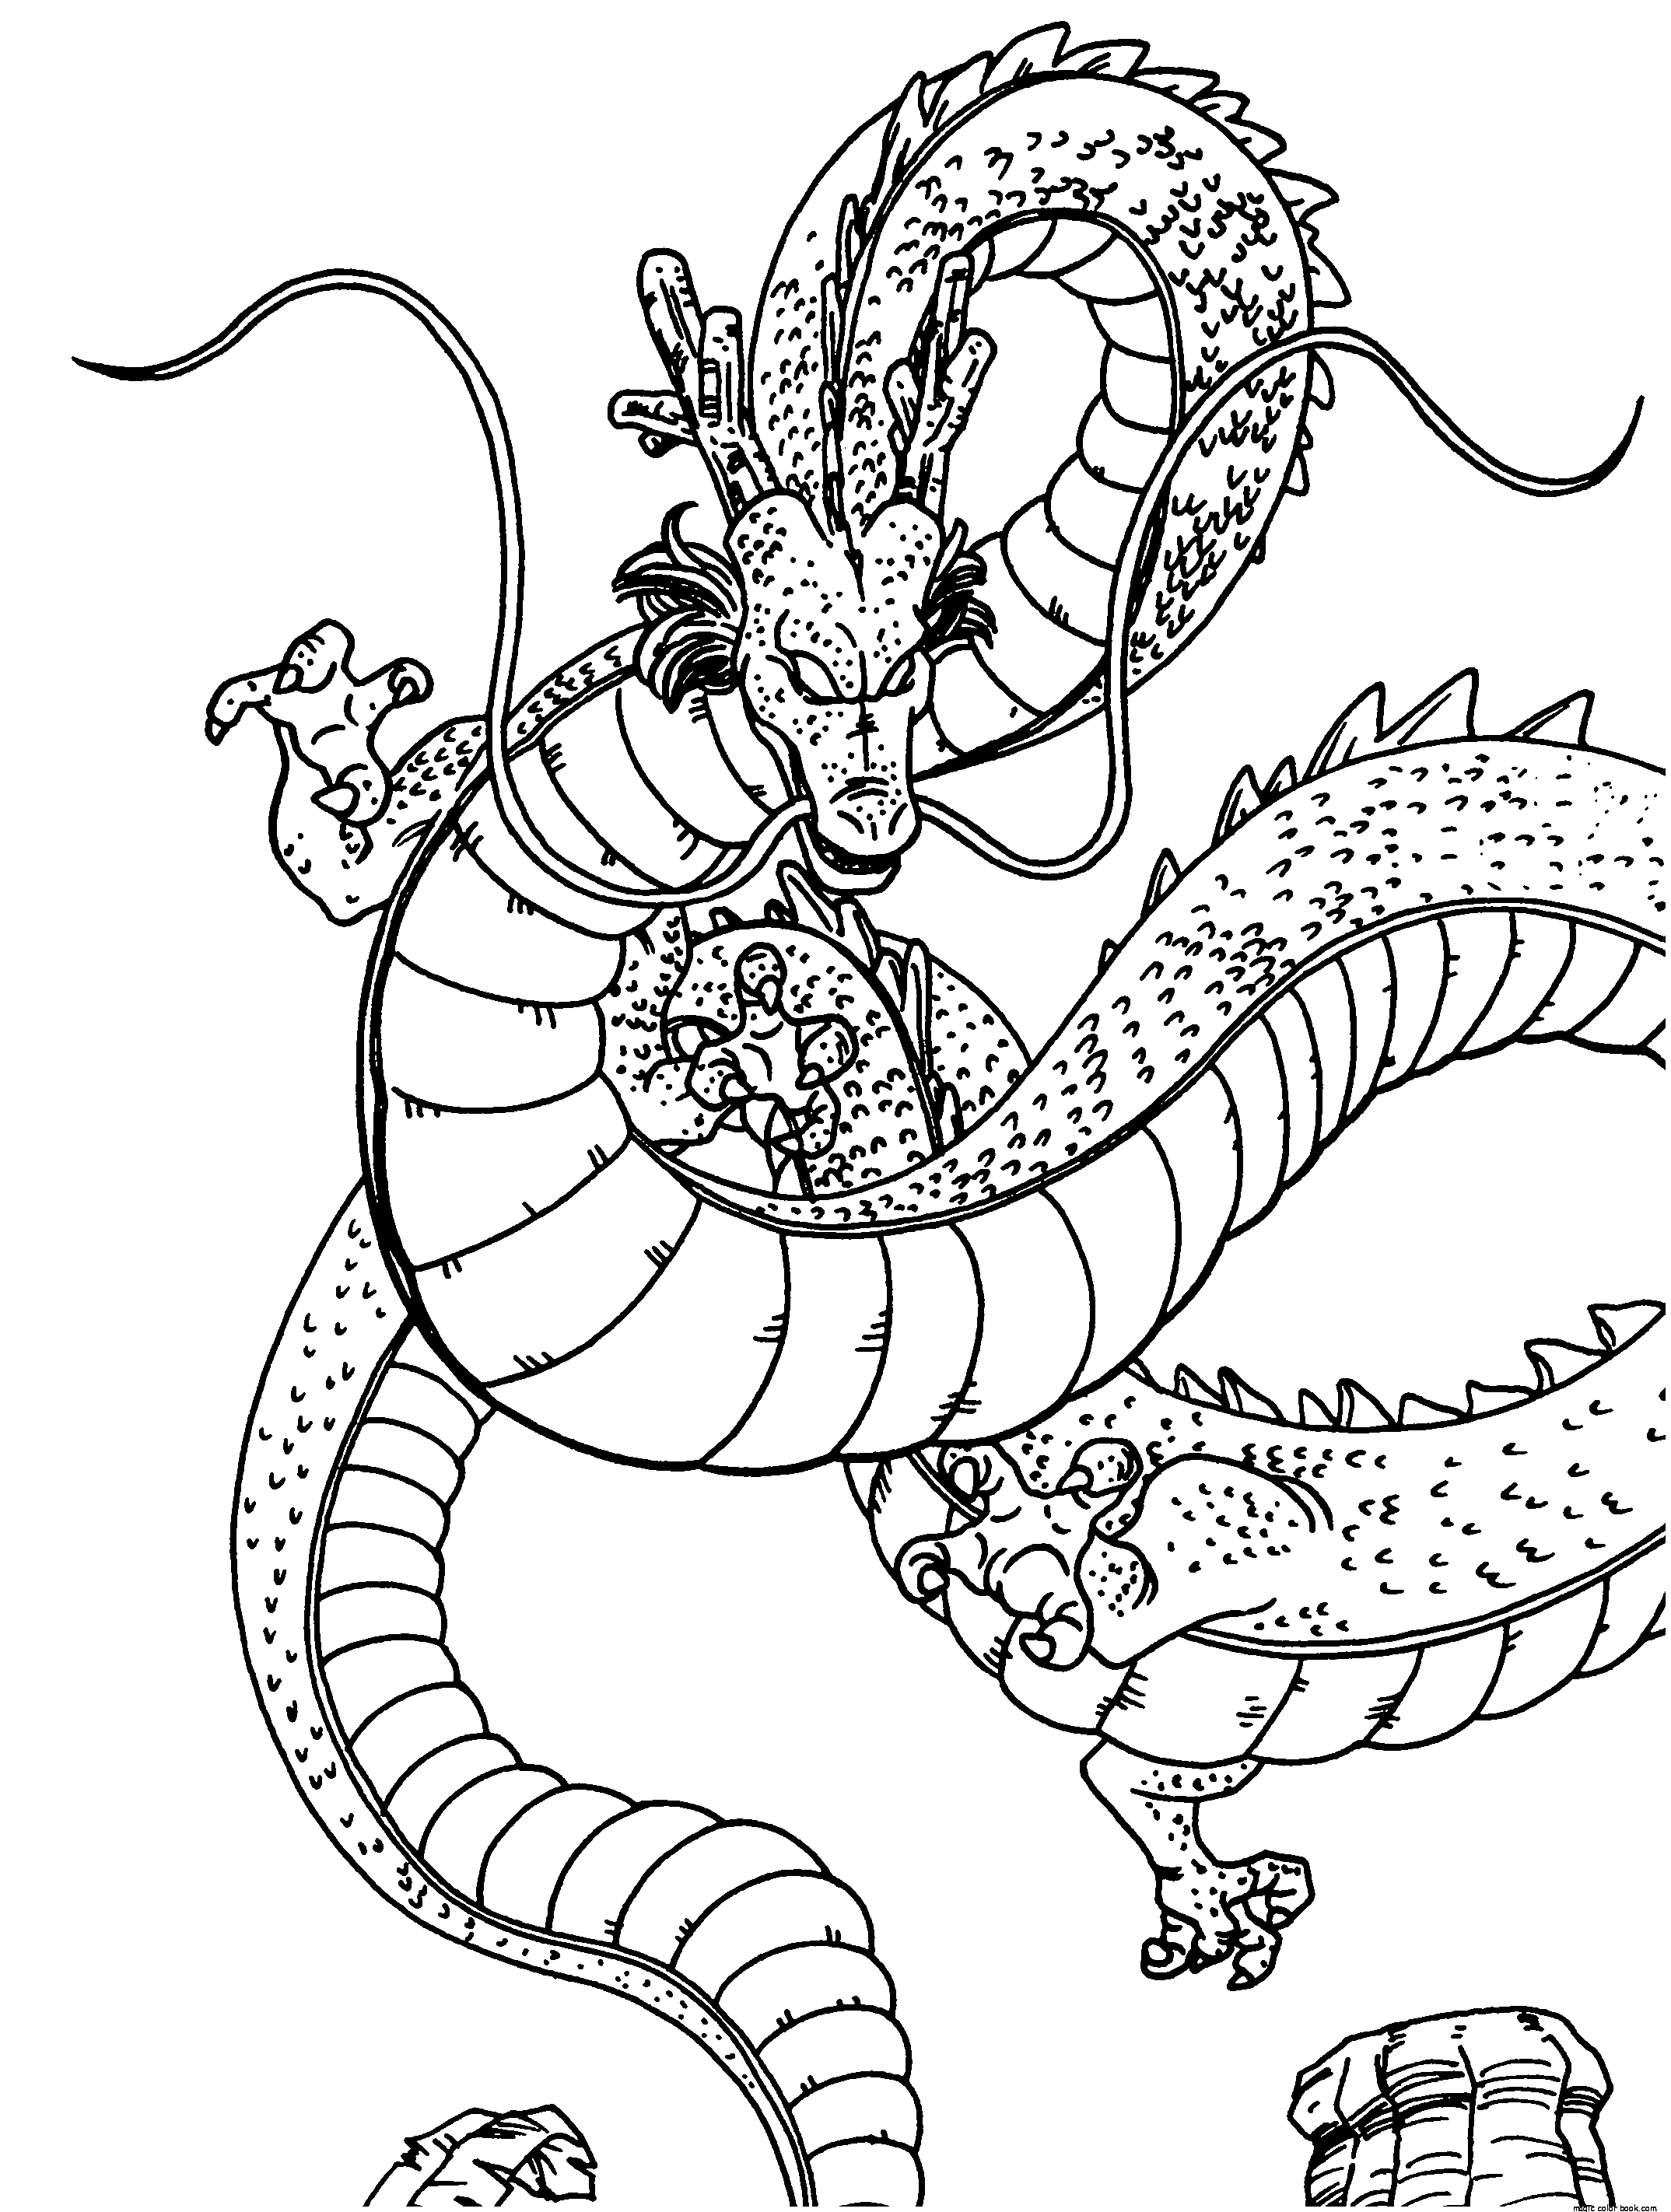 color dragon ball z dragon ball coloring pages best coloring pages for kids ball color dragon z 